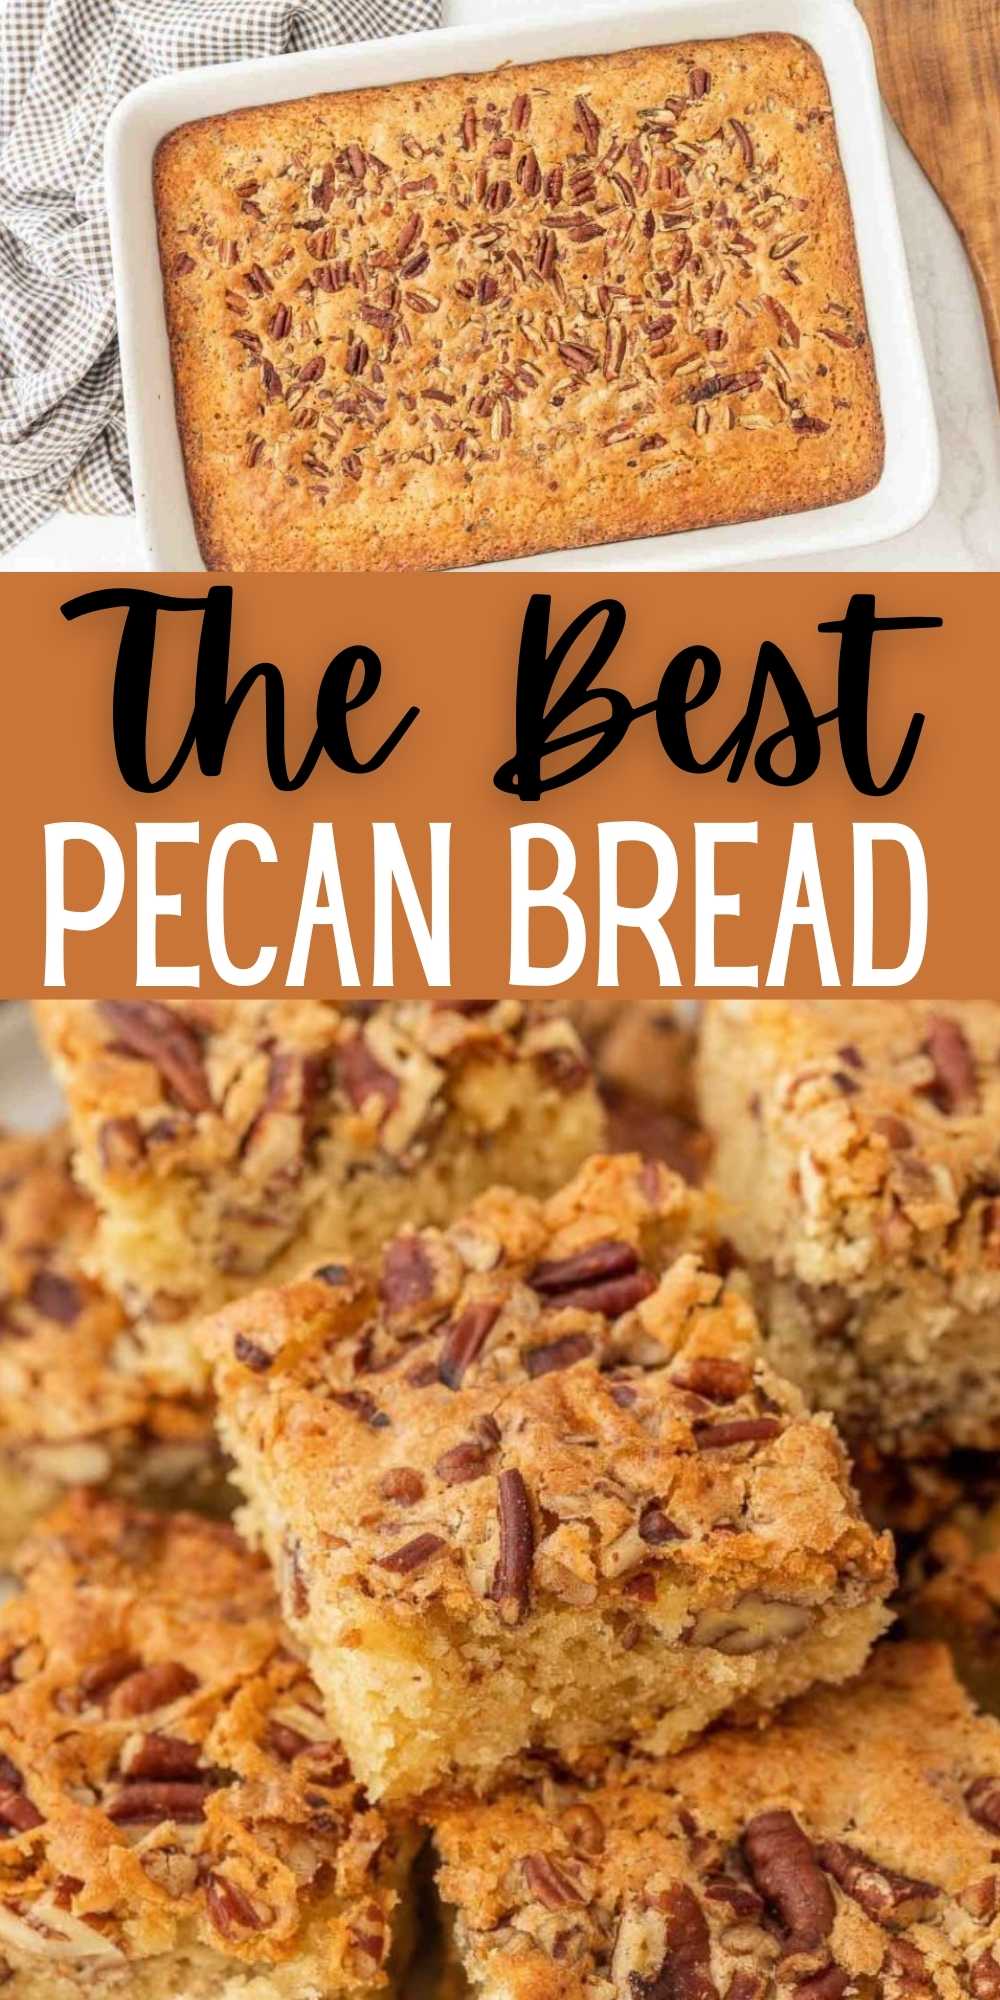 Pecan Bread is a delicious dessert that is perfect for after dinner or with your morning coffee. A favorite bread recipe that is flavorful. #eatingonadime #pecanbread #breadrecipes